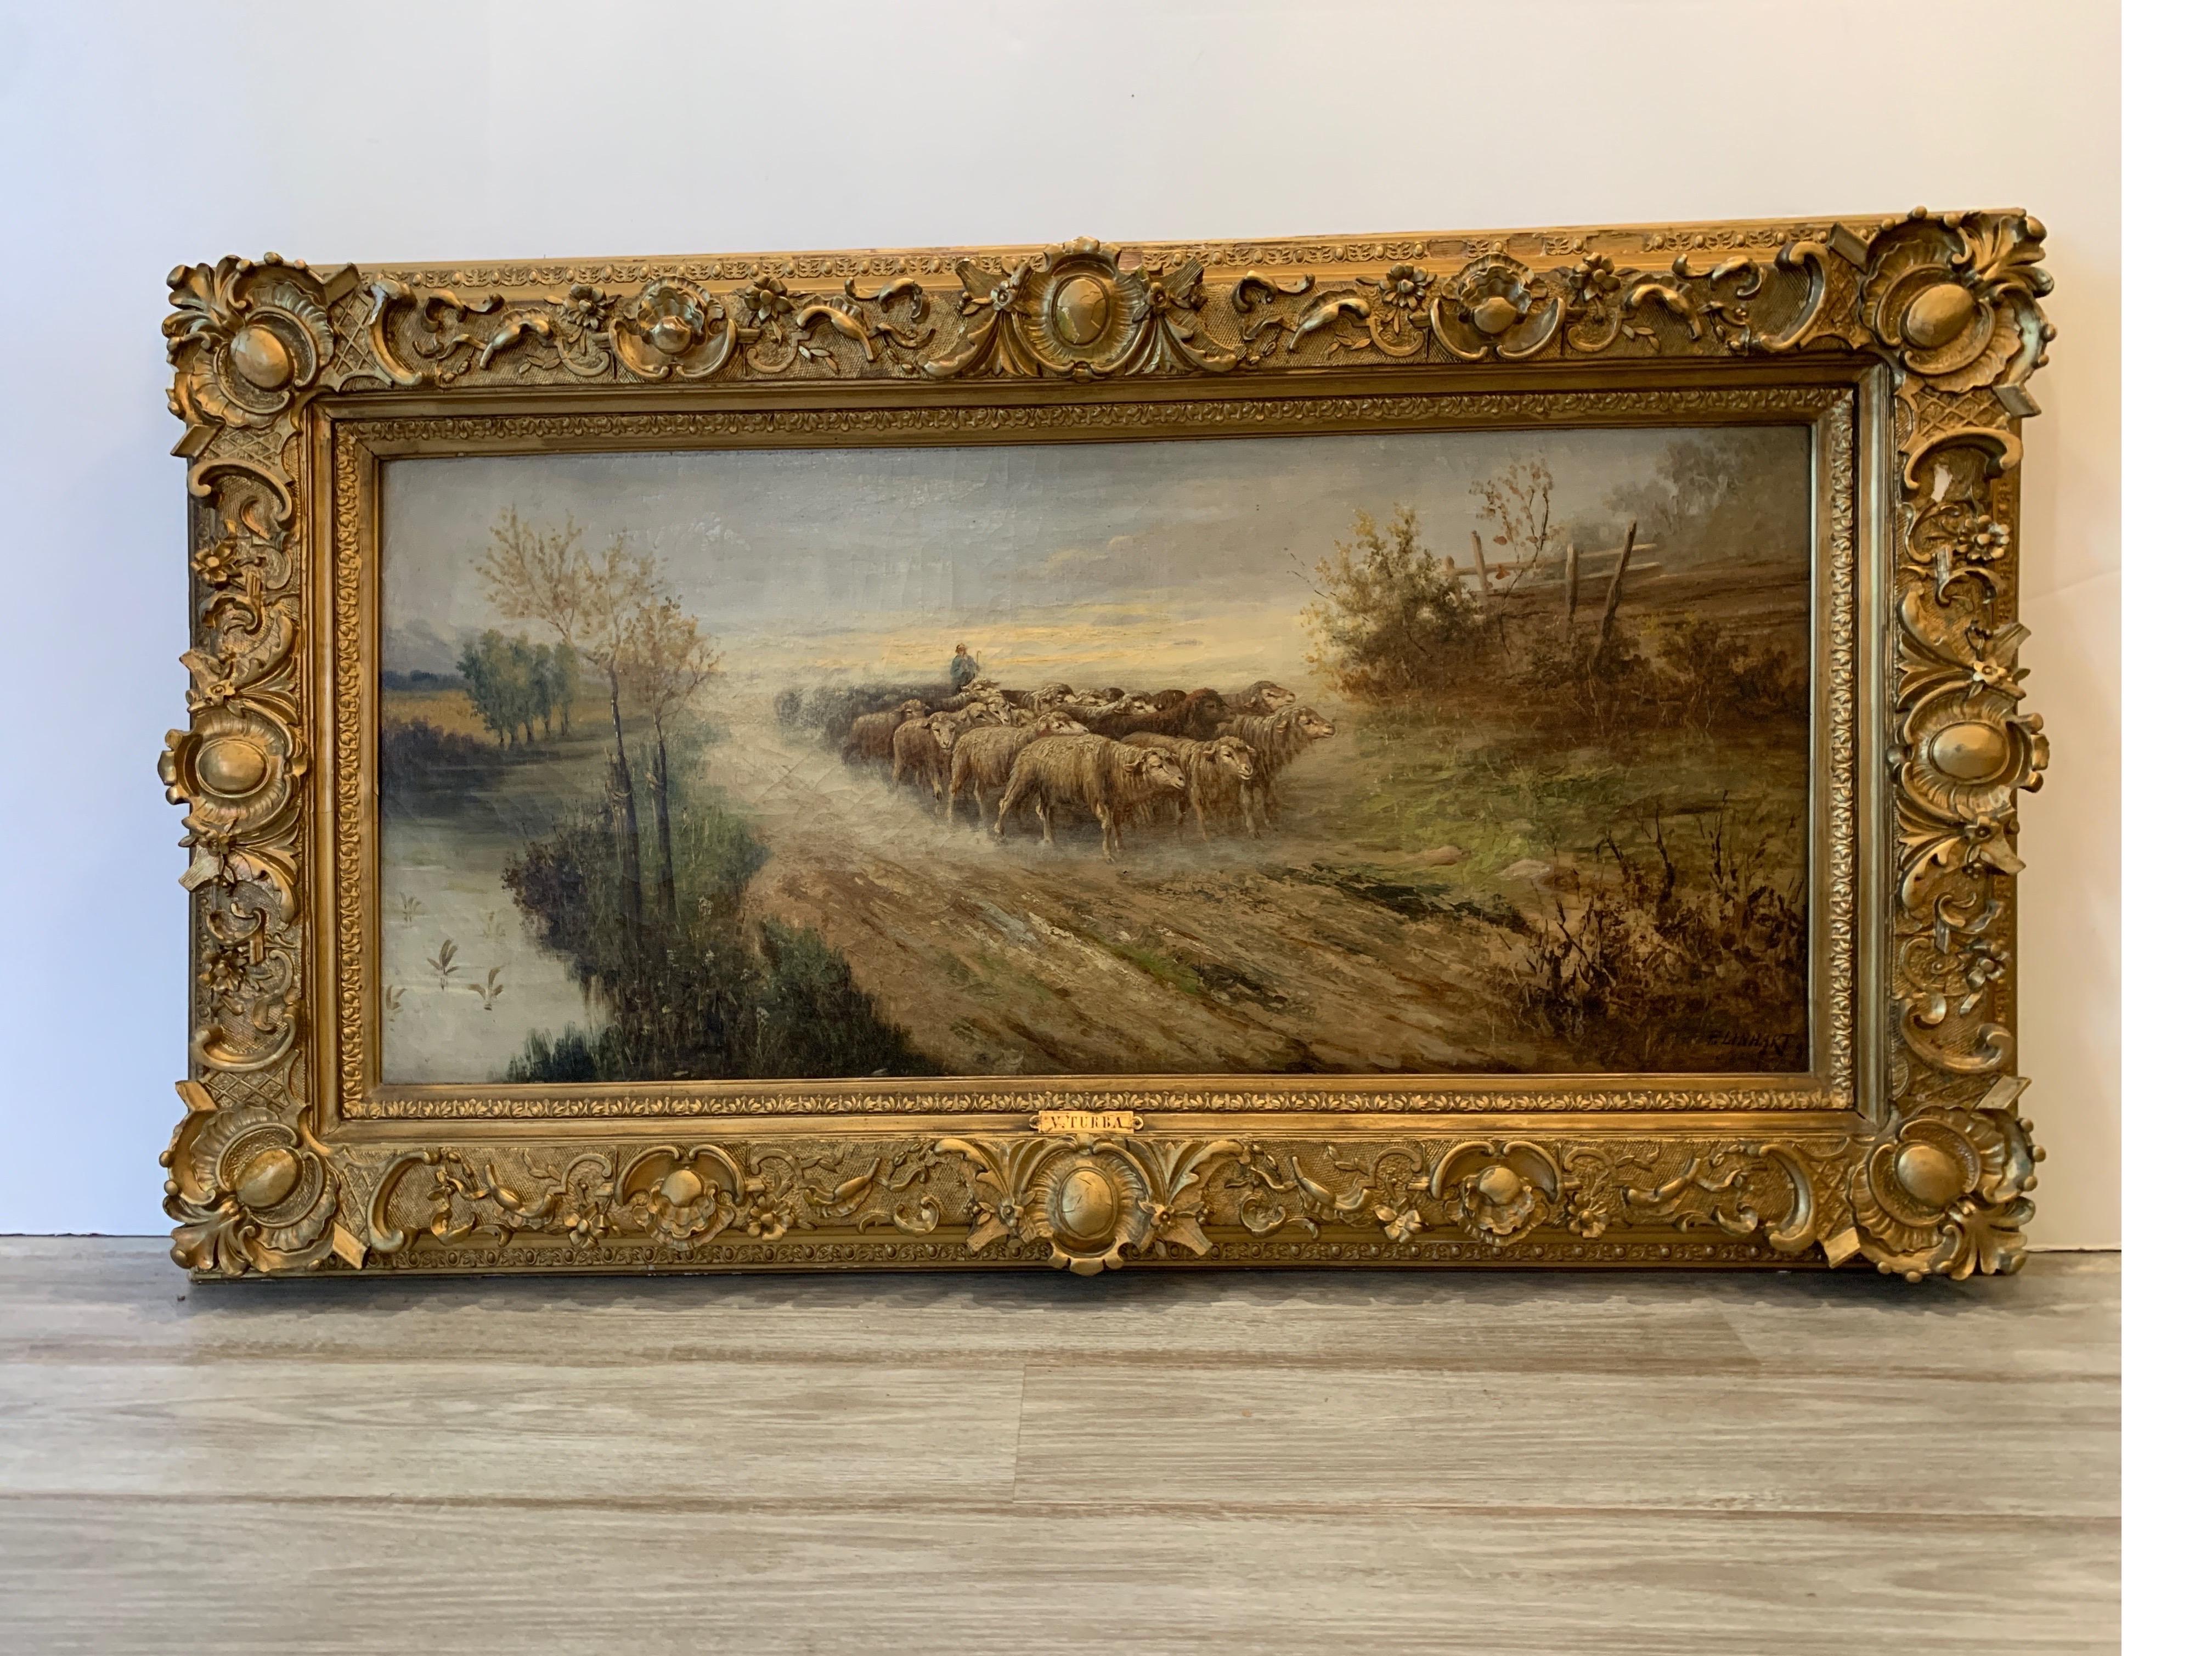 19th century original European oil on canvas of sheep on path, signed by Linhart
Nice painting of sheep being guided down a country path, great for a country or farm house.
Dimensions: 3.25